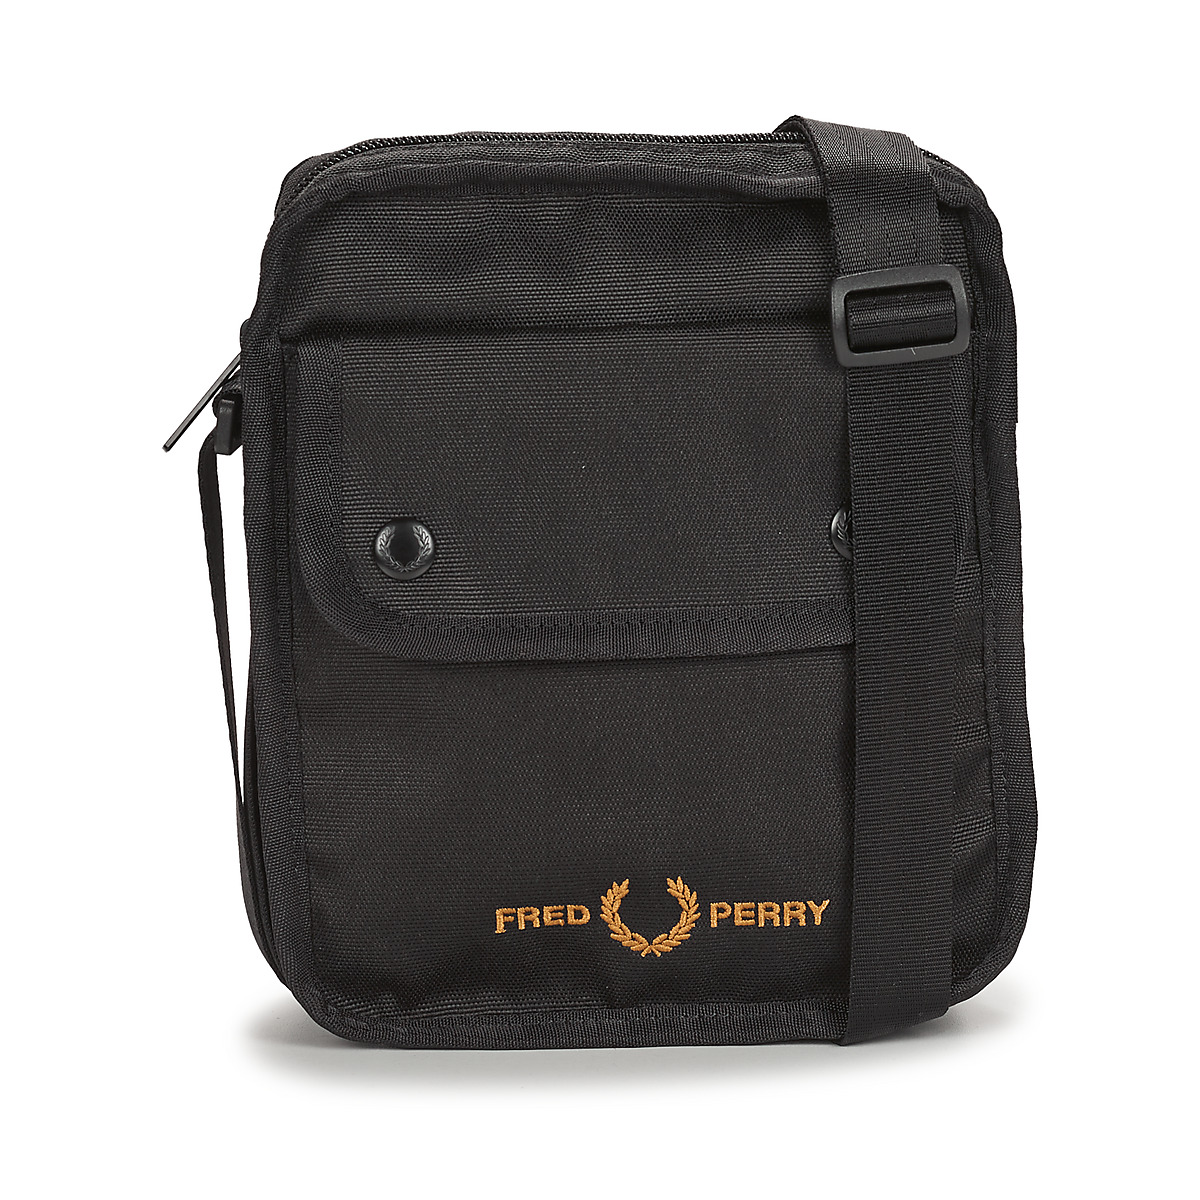 Sacs Pochettes / Sacoches Fred Perry BRANDED SIDE BAG latest BLACK